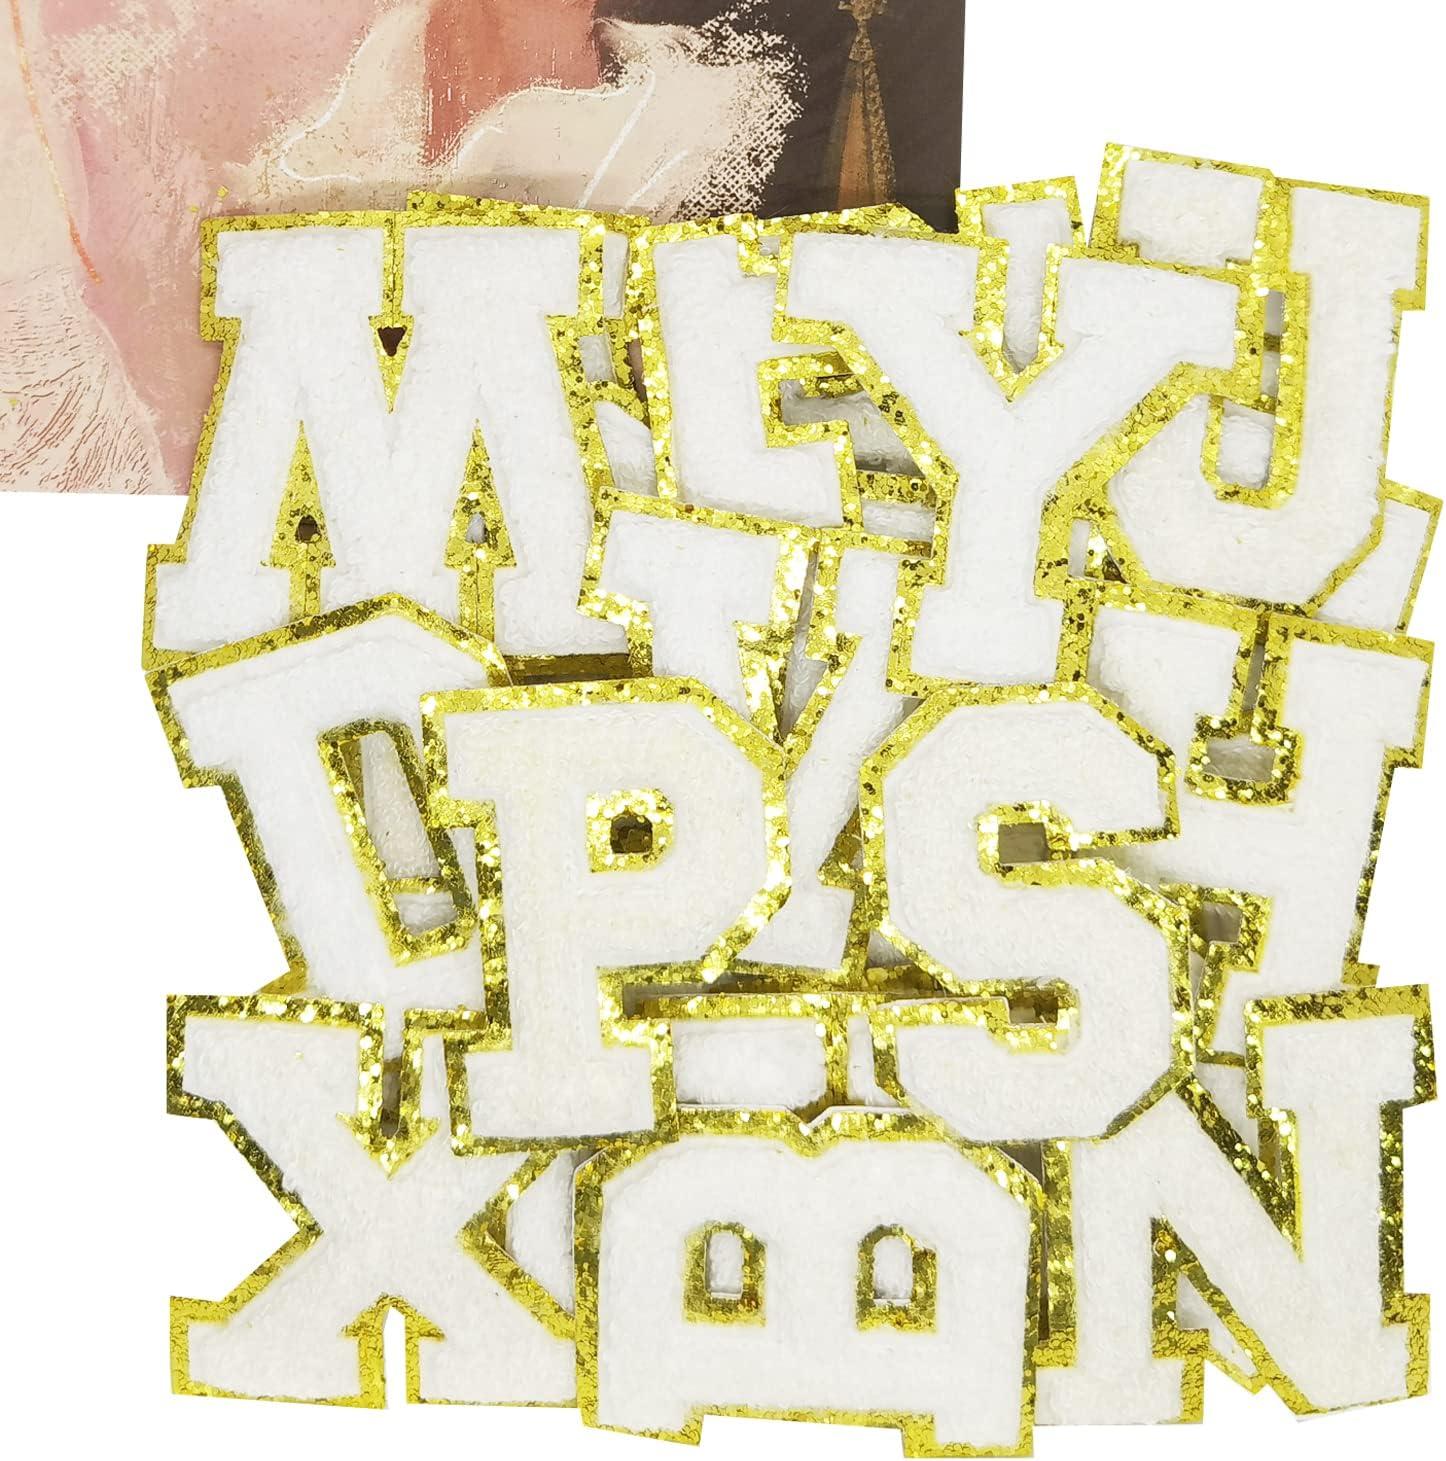 Chenille Alphabet Number Patches With AZ Glitters And Gold Border For DIY  Art, Clothespin Crafts, Clothing Iron On Letters For Parties And Events  2288515 From Rrjg, $0.68